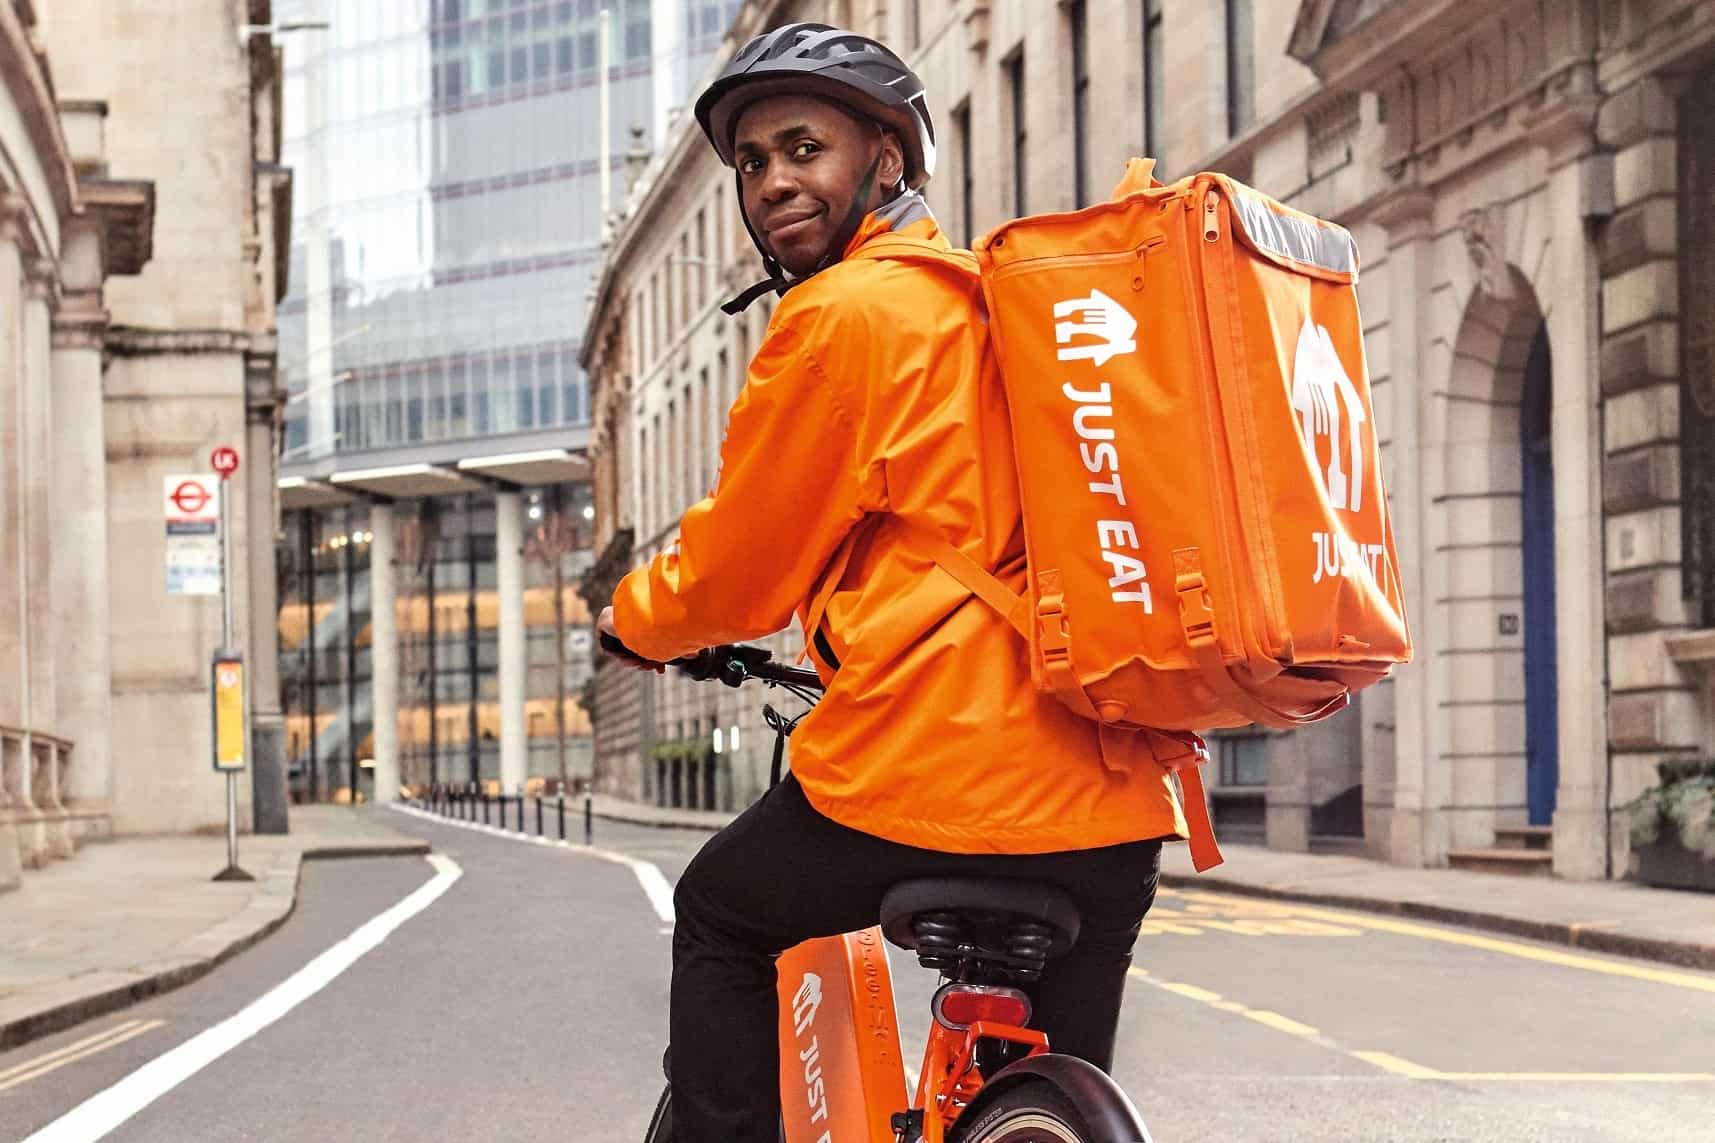 Just Eat will soon be delivering Co-op groceries. Image courtesy of Just Eat